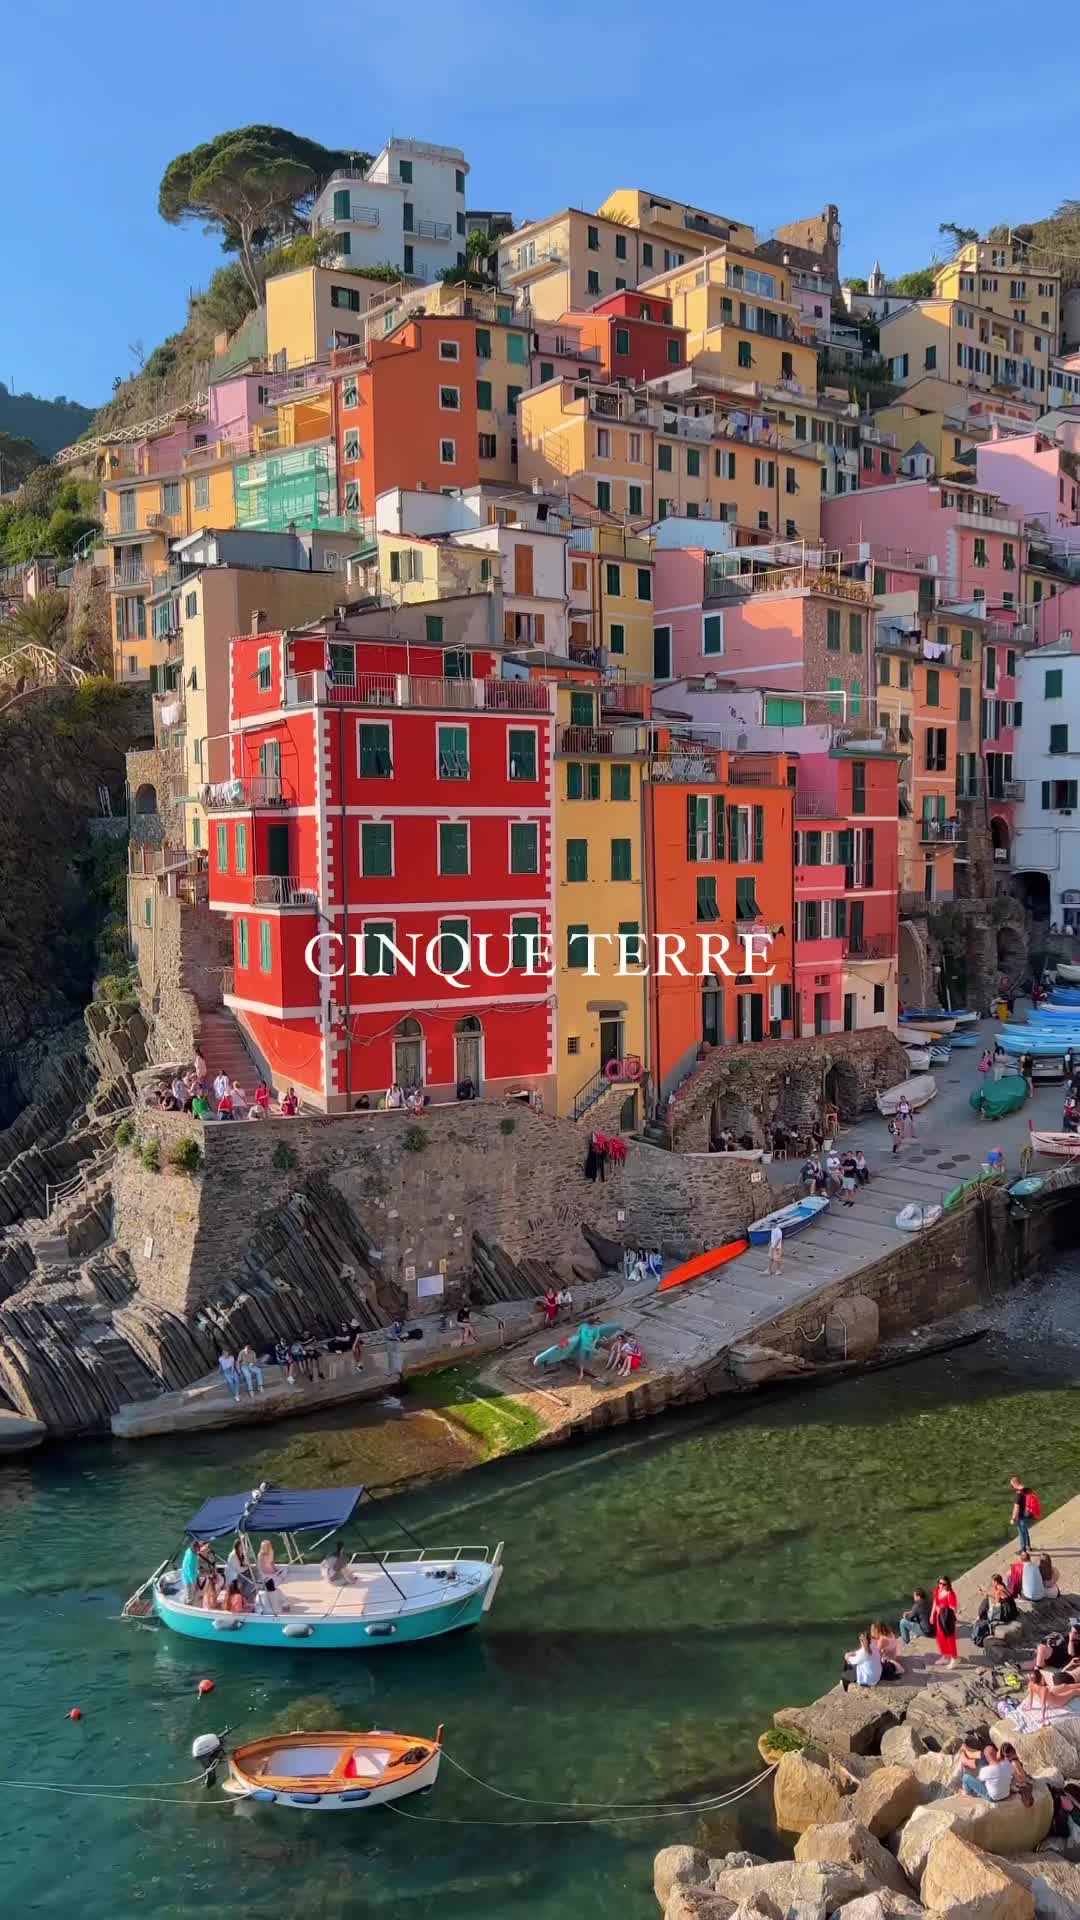 Heading to Cinque Terre? Here’s a few tips on what to see and do in this gorgeous part of Italy ❤️🇮🇹

Located in the northern region of Liguria, Cinque Terre is made of 5 towns: Monterosso, Vernazza, Corniglia, Manarola and Riomaggiore. 

✈️ How long should you stay? I believe 3 days is the best, as you can explore everything without rushing between towns. I went for 2 days, and even though I managed to see a lot, I feel I’d have enjoyed it better if I had one extra day.
If you only have one day, go to Manarola, Vernazza, and Riomaggiore. And if you’re coming in the summer and want to go to the beach, skip one of the 3 and go to Monterosso instead, it has the best beaches.

🏡 Where to stay? Staying in one of the towns can be a bit more expensive but it’s a lovely experience. If you want to save some euros, stay in La Spezia. It’s perfectly connected by train.

🎟️ For getting around, buy the Cinque Terre pass, it offers unlimited train travel for 24, 48, or 72 hours. I chose the 48-hour pass, which also included access to hiking trails, costing €33. The ferry is another option and perfect to enjoy a different perspective of the towns. 

❤️ Some of my favourite spots: 
- In Monterosso, don’t miss the Statue of the Giant. 
- In Vernazza, explore 3 incredible viewpoints, the first one is exactly here: 44°08’13.2”N 9°40’51.6”E. It’s inside the trail between Vernazza and Monterosso, but if you have the Cinque Terre pass, you don’t have to pay the ticket for the trail. 
The second one is near ‘Ristorante la Torre.’ Both require a bit of hiking but offer stunning views. 
The third is from the Doria Tower (€2 ticket).
- In Corniglia, visit the bar ‘Marina di Corniglia’ for incredible views and excellent Aperol Spritz. 
- In Manarola, try the insta-famous Nessun Dorma, worth the hype despite long waiting times. The view close to the restaurant is incredible. 
- In Riomaggiore, enjoy the view from the port and explore the higher part. Go to Rosa bakery for some delicious focaccia!

Cinque Terre is and I’m sure you’ll love it! Save this post and follow me for more incredible places to visit in Italy! 😍 

#cinqueterre #italia #italy #cinqueterreitaly